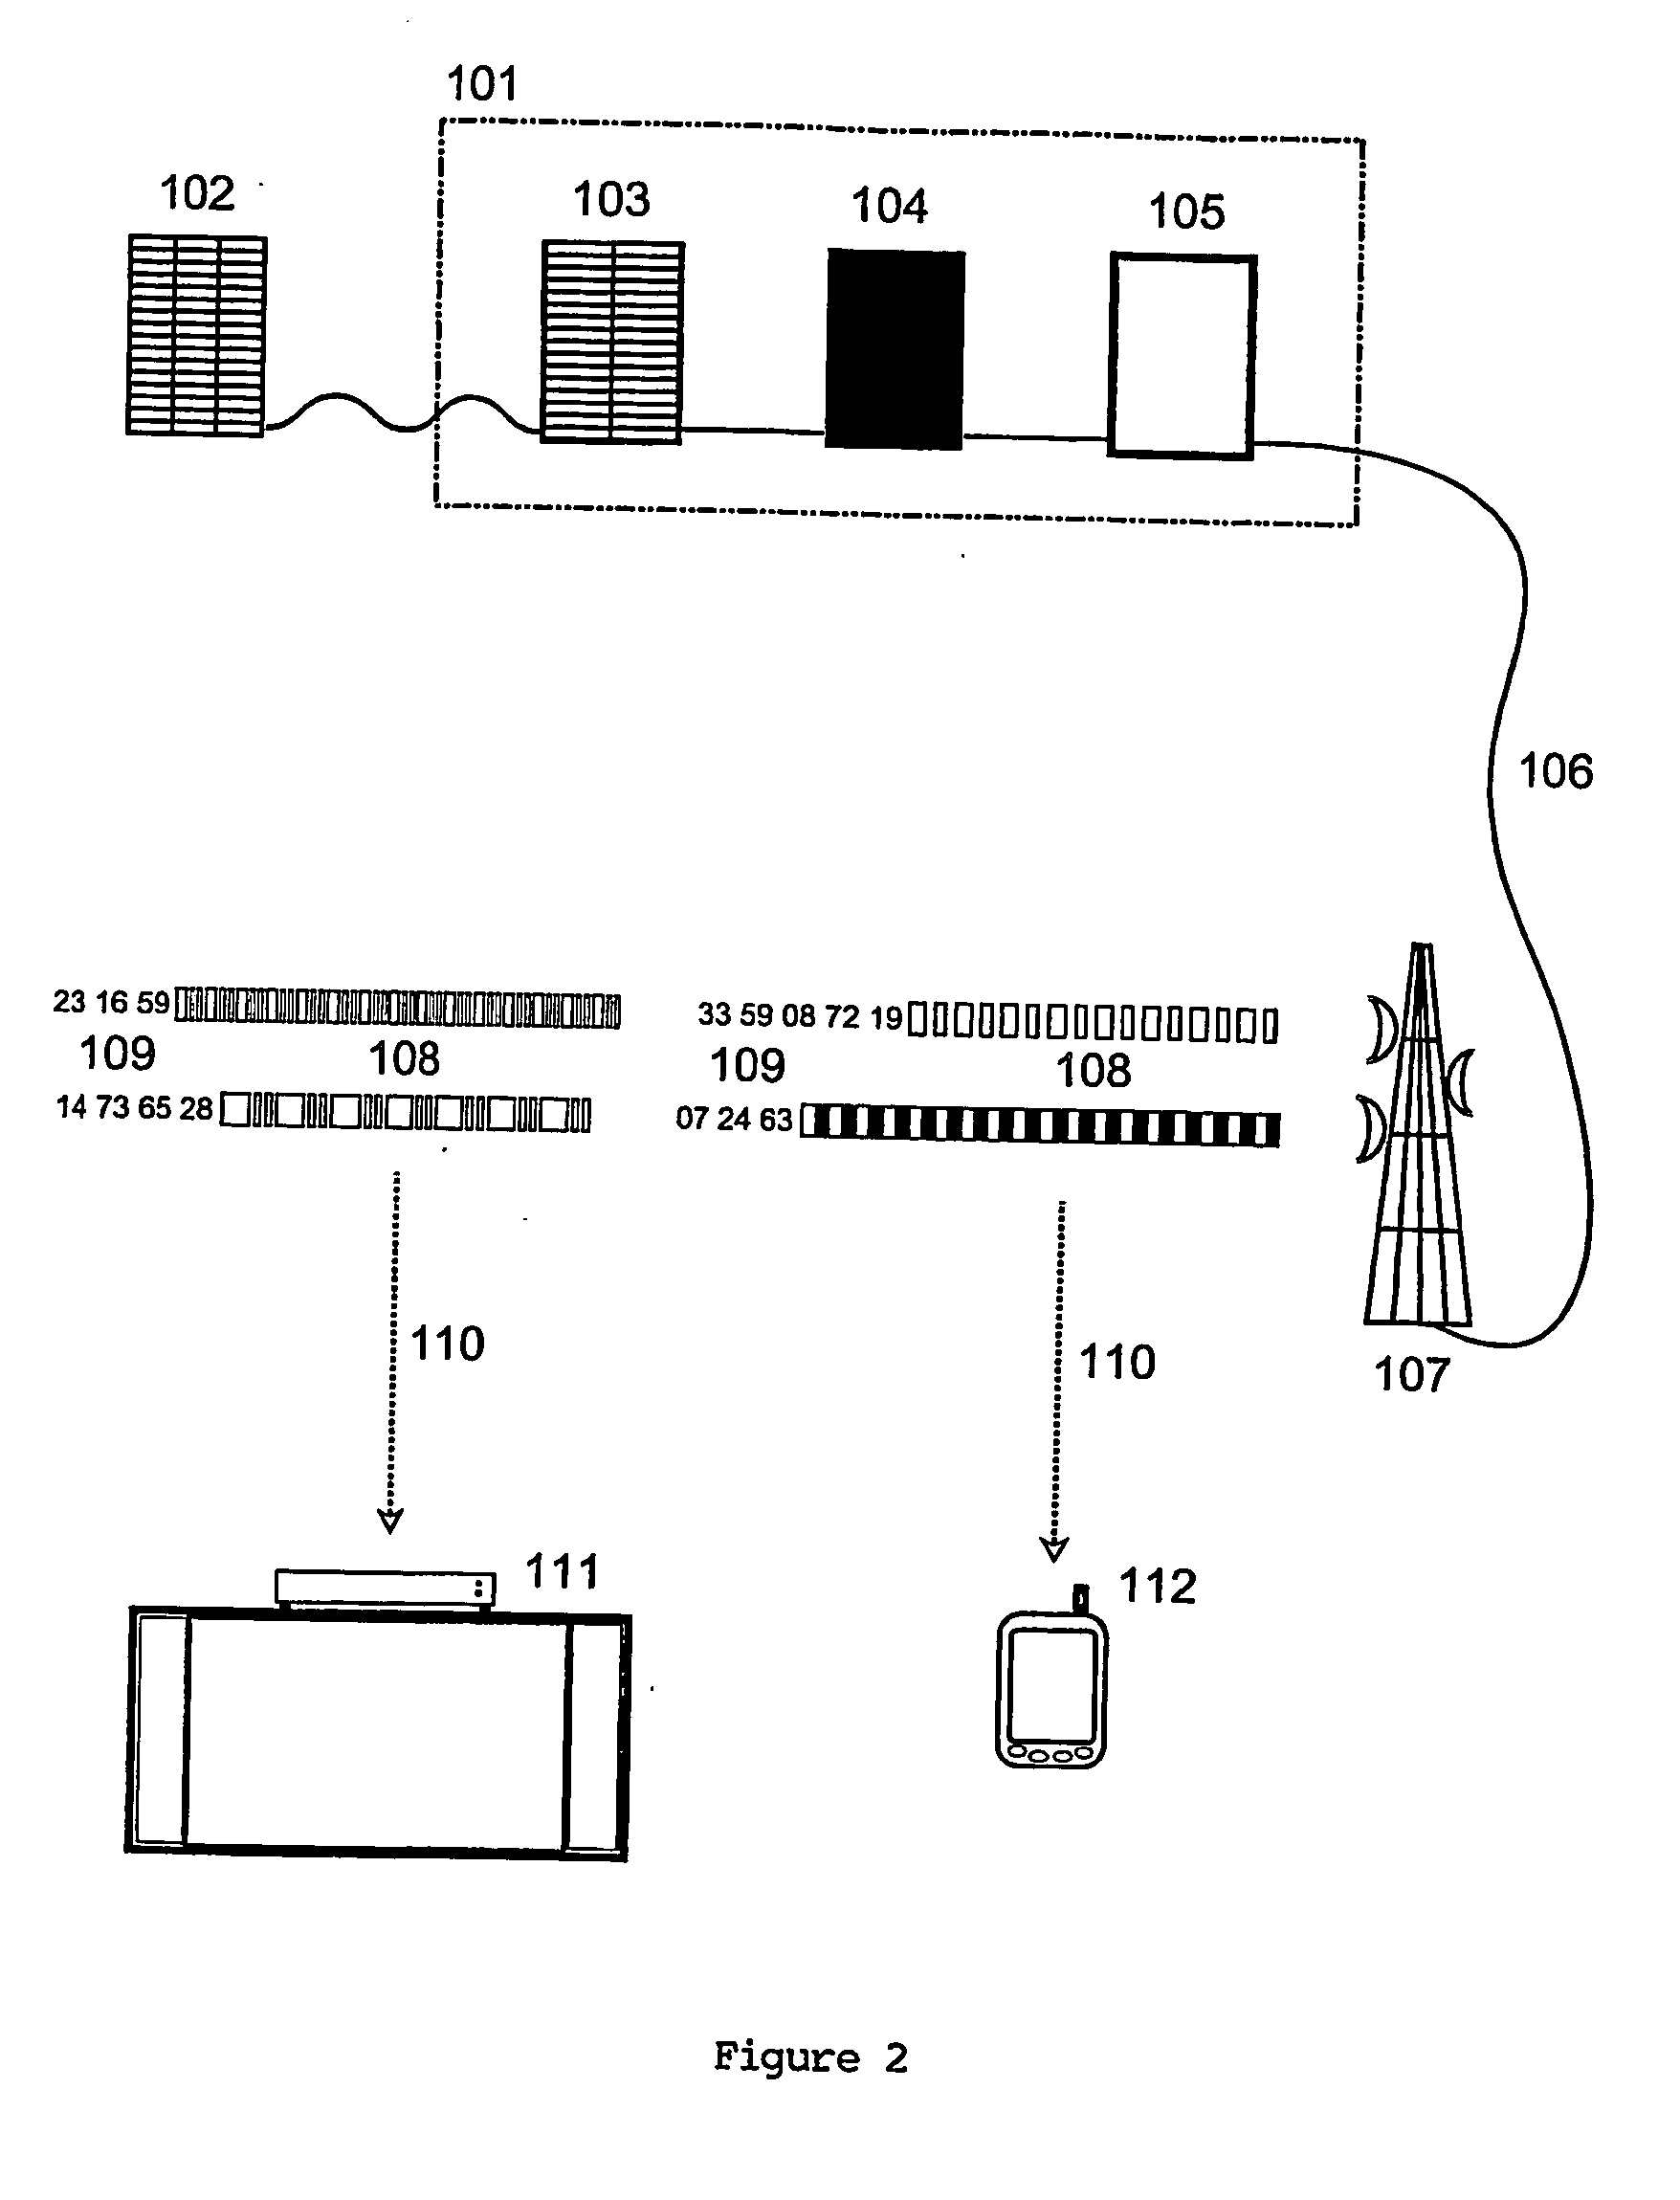 System and method using alphanumeric codes for the identification, description, classification and encoding of information